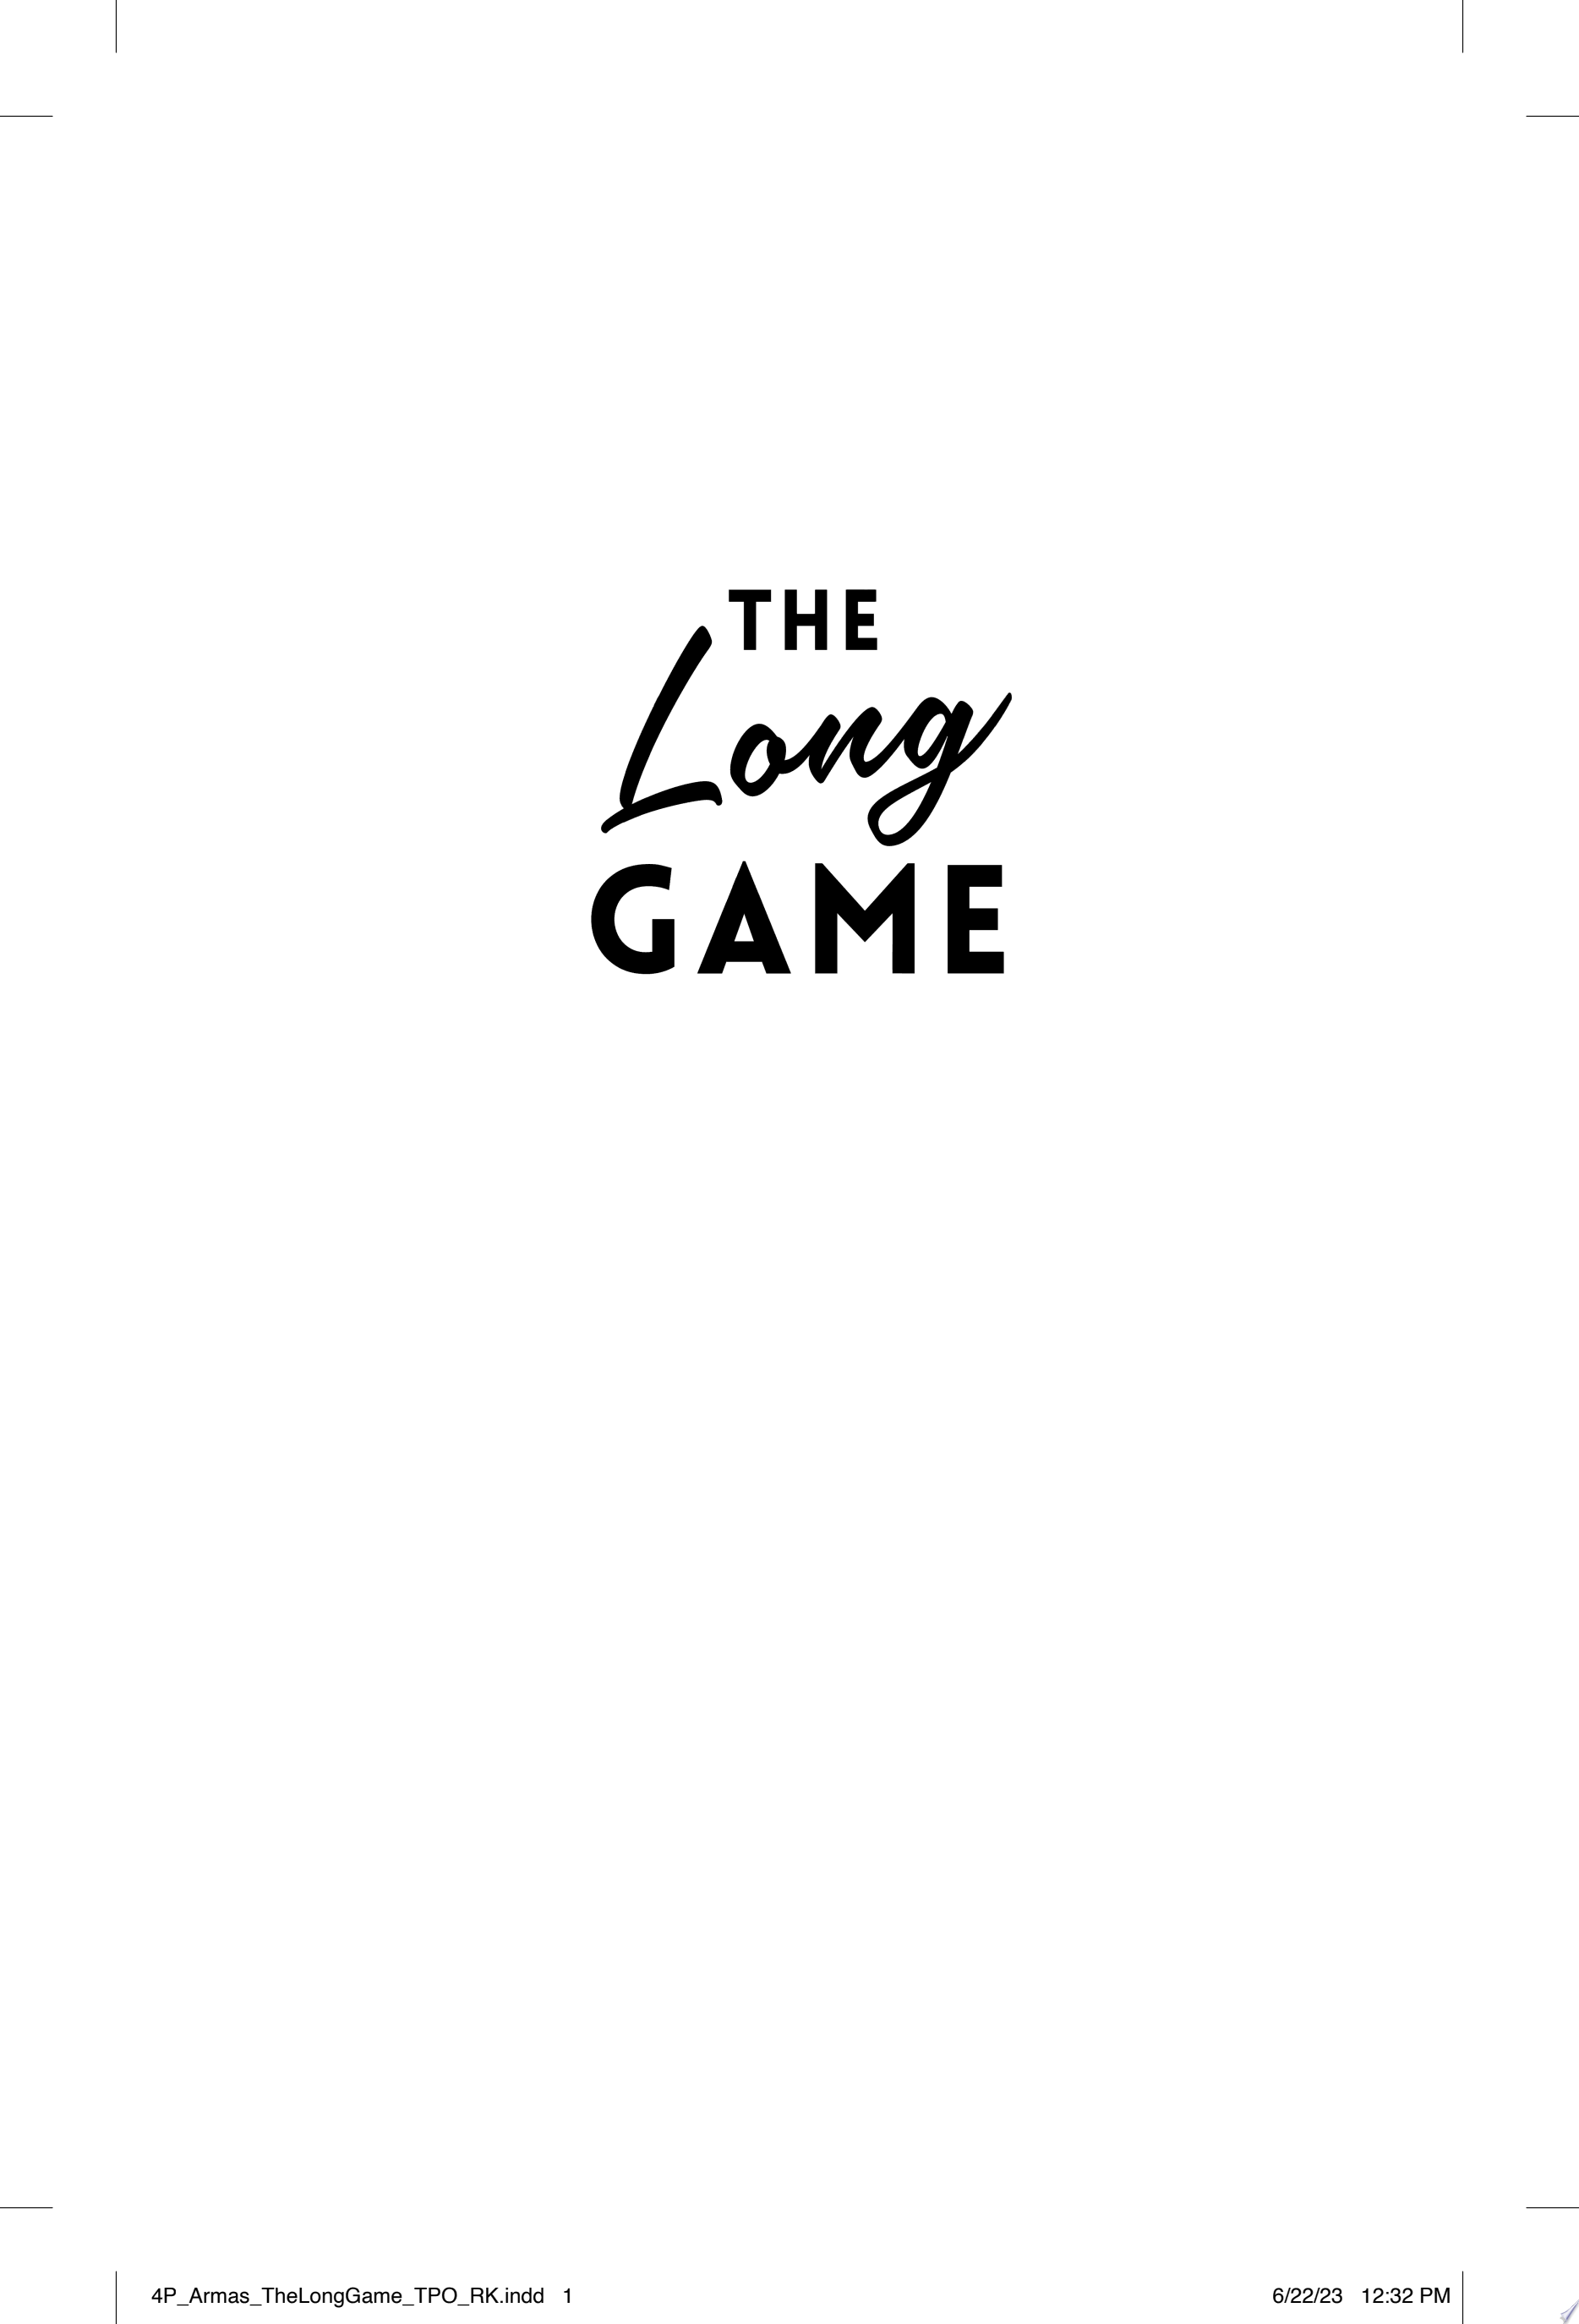 Image for "The Long Game"